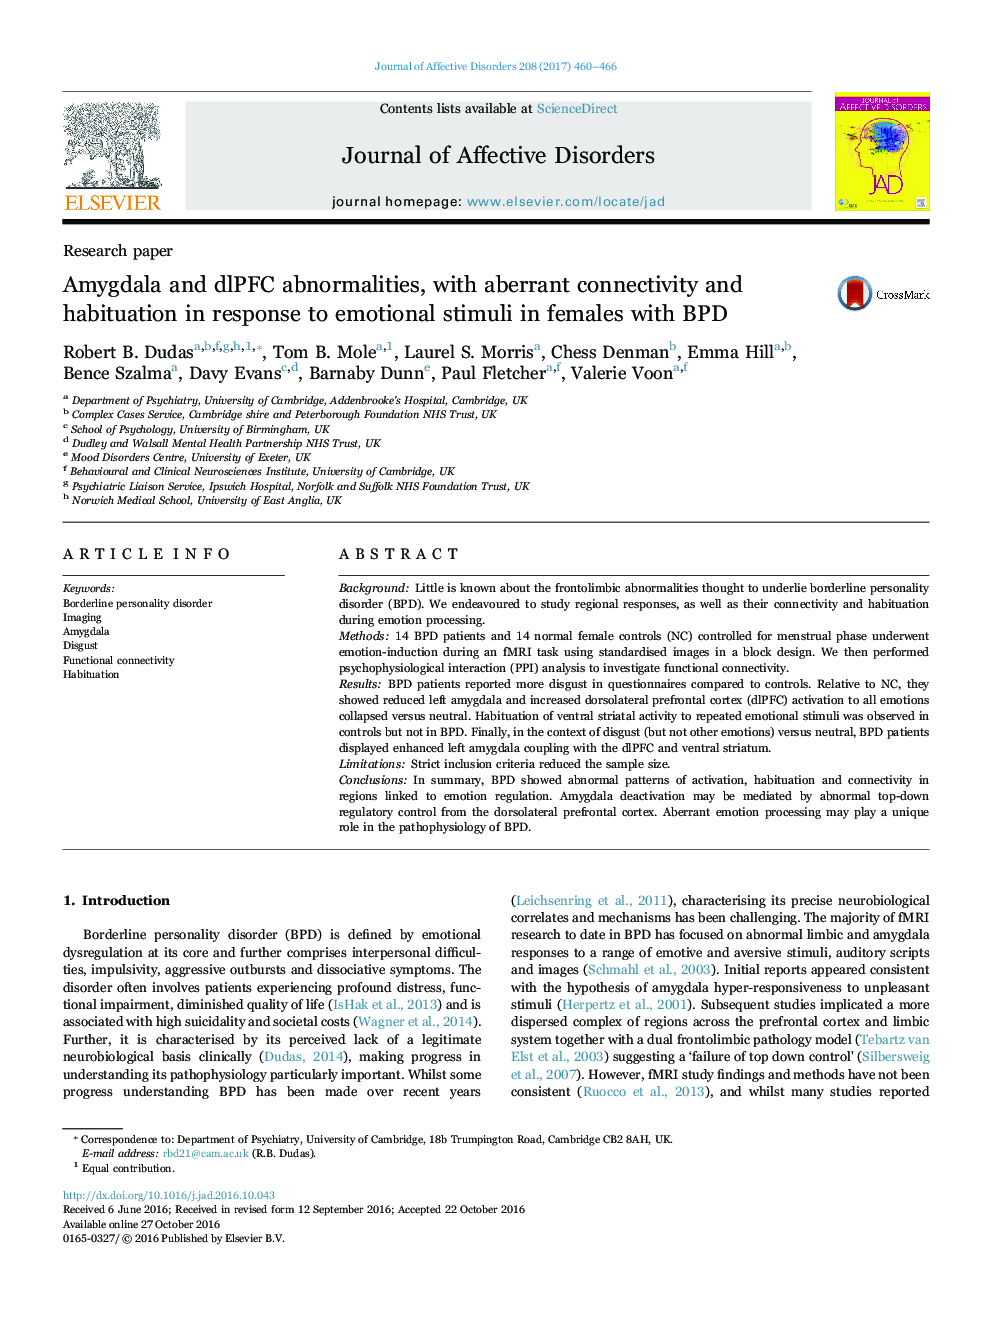 Research paperAmygdala and dlPFC abnormalities, with aberrant connectivity and habituation in response to emotional stimuli in females with BPD